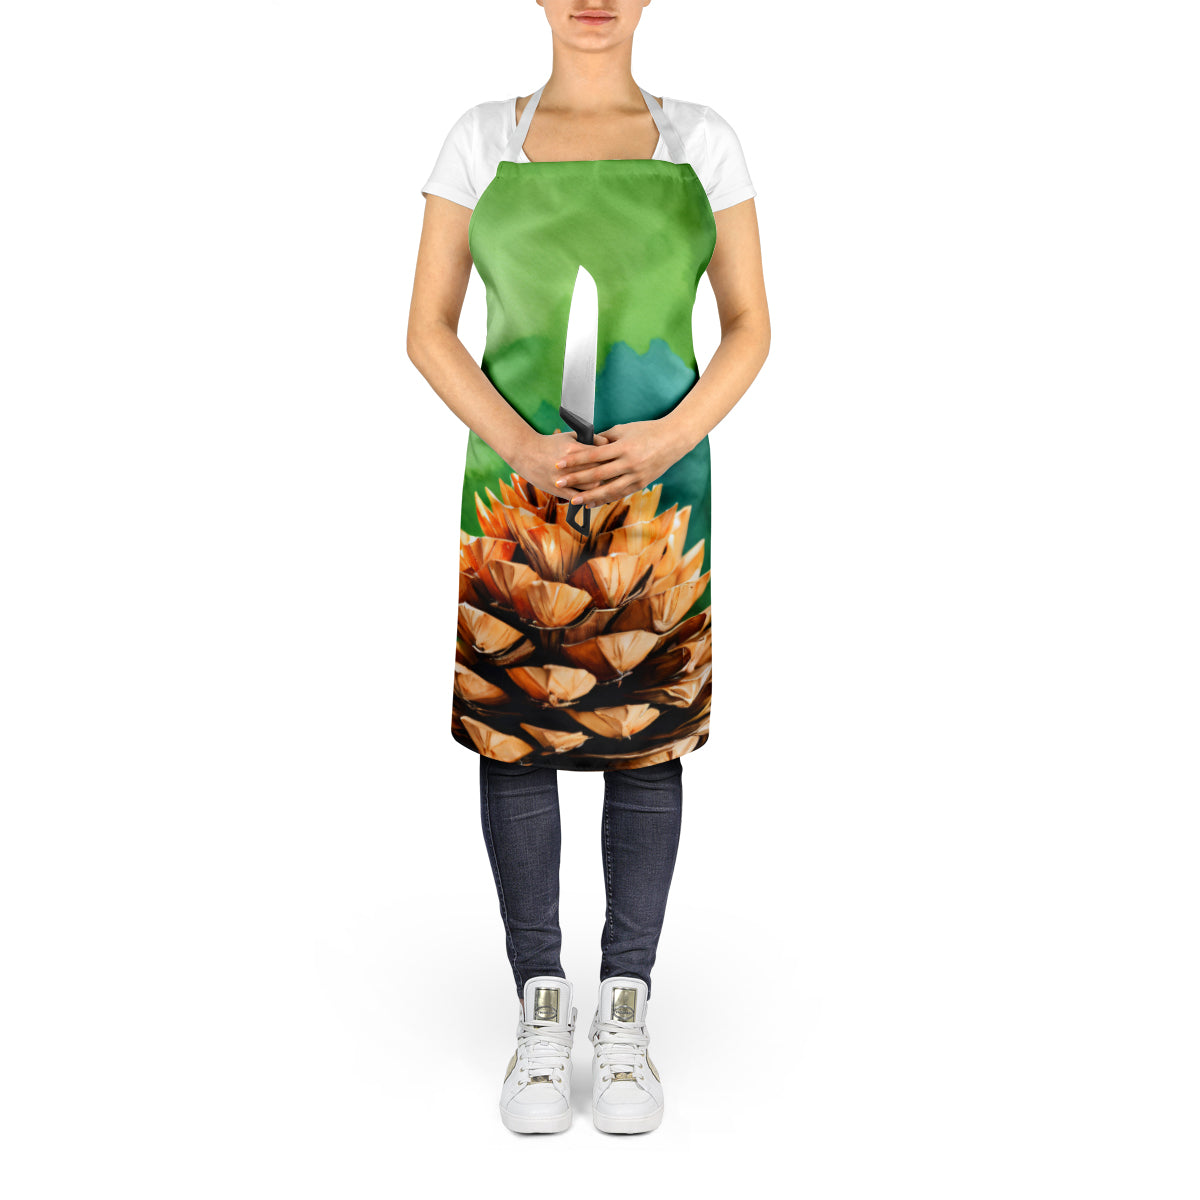 Maine White Pine Cone and Tassels in Watercolor Apron